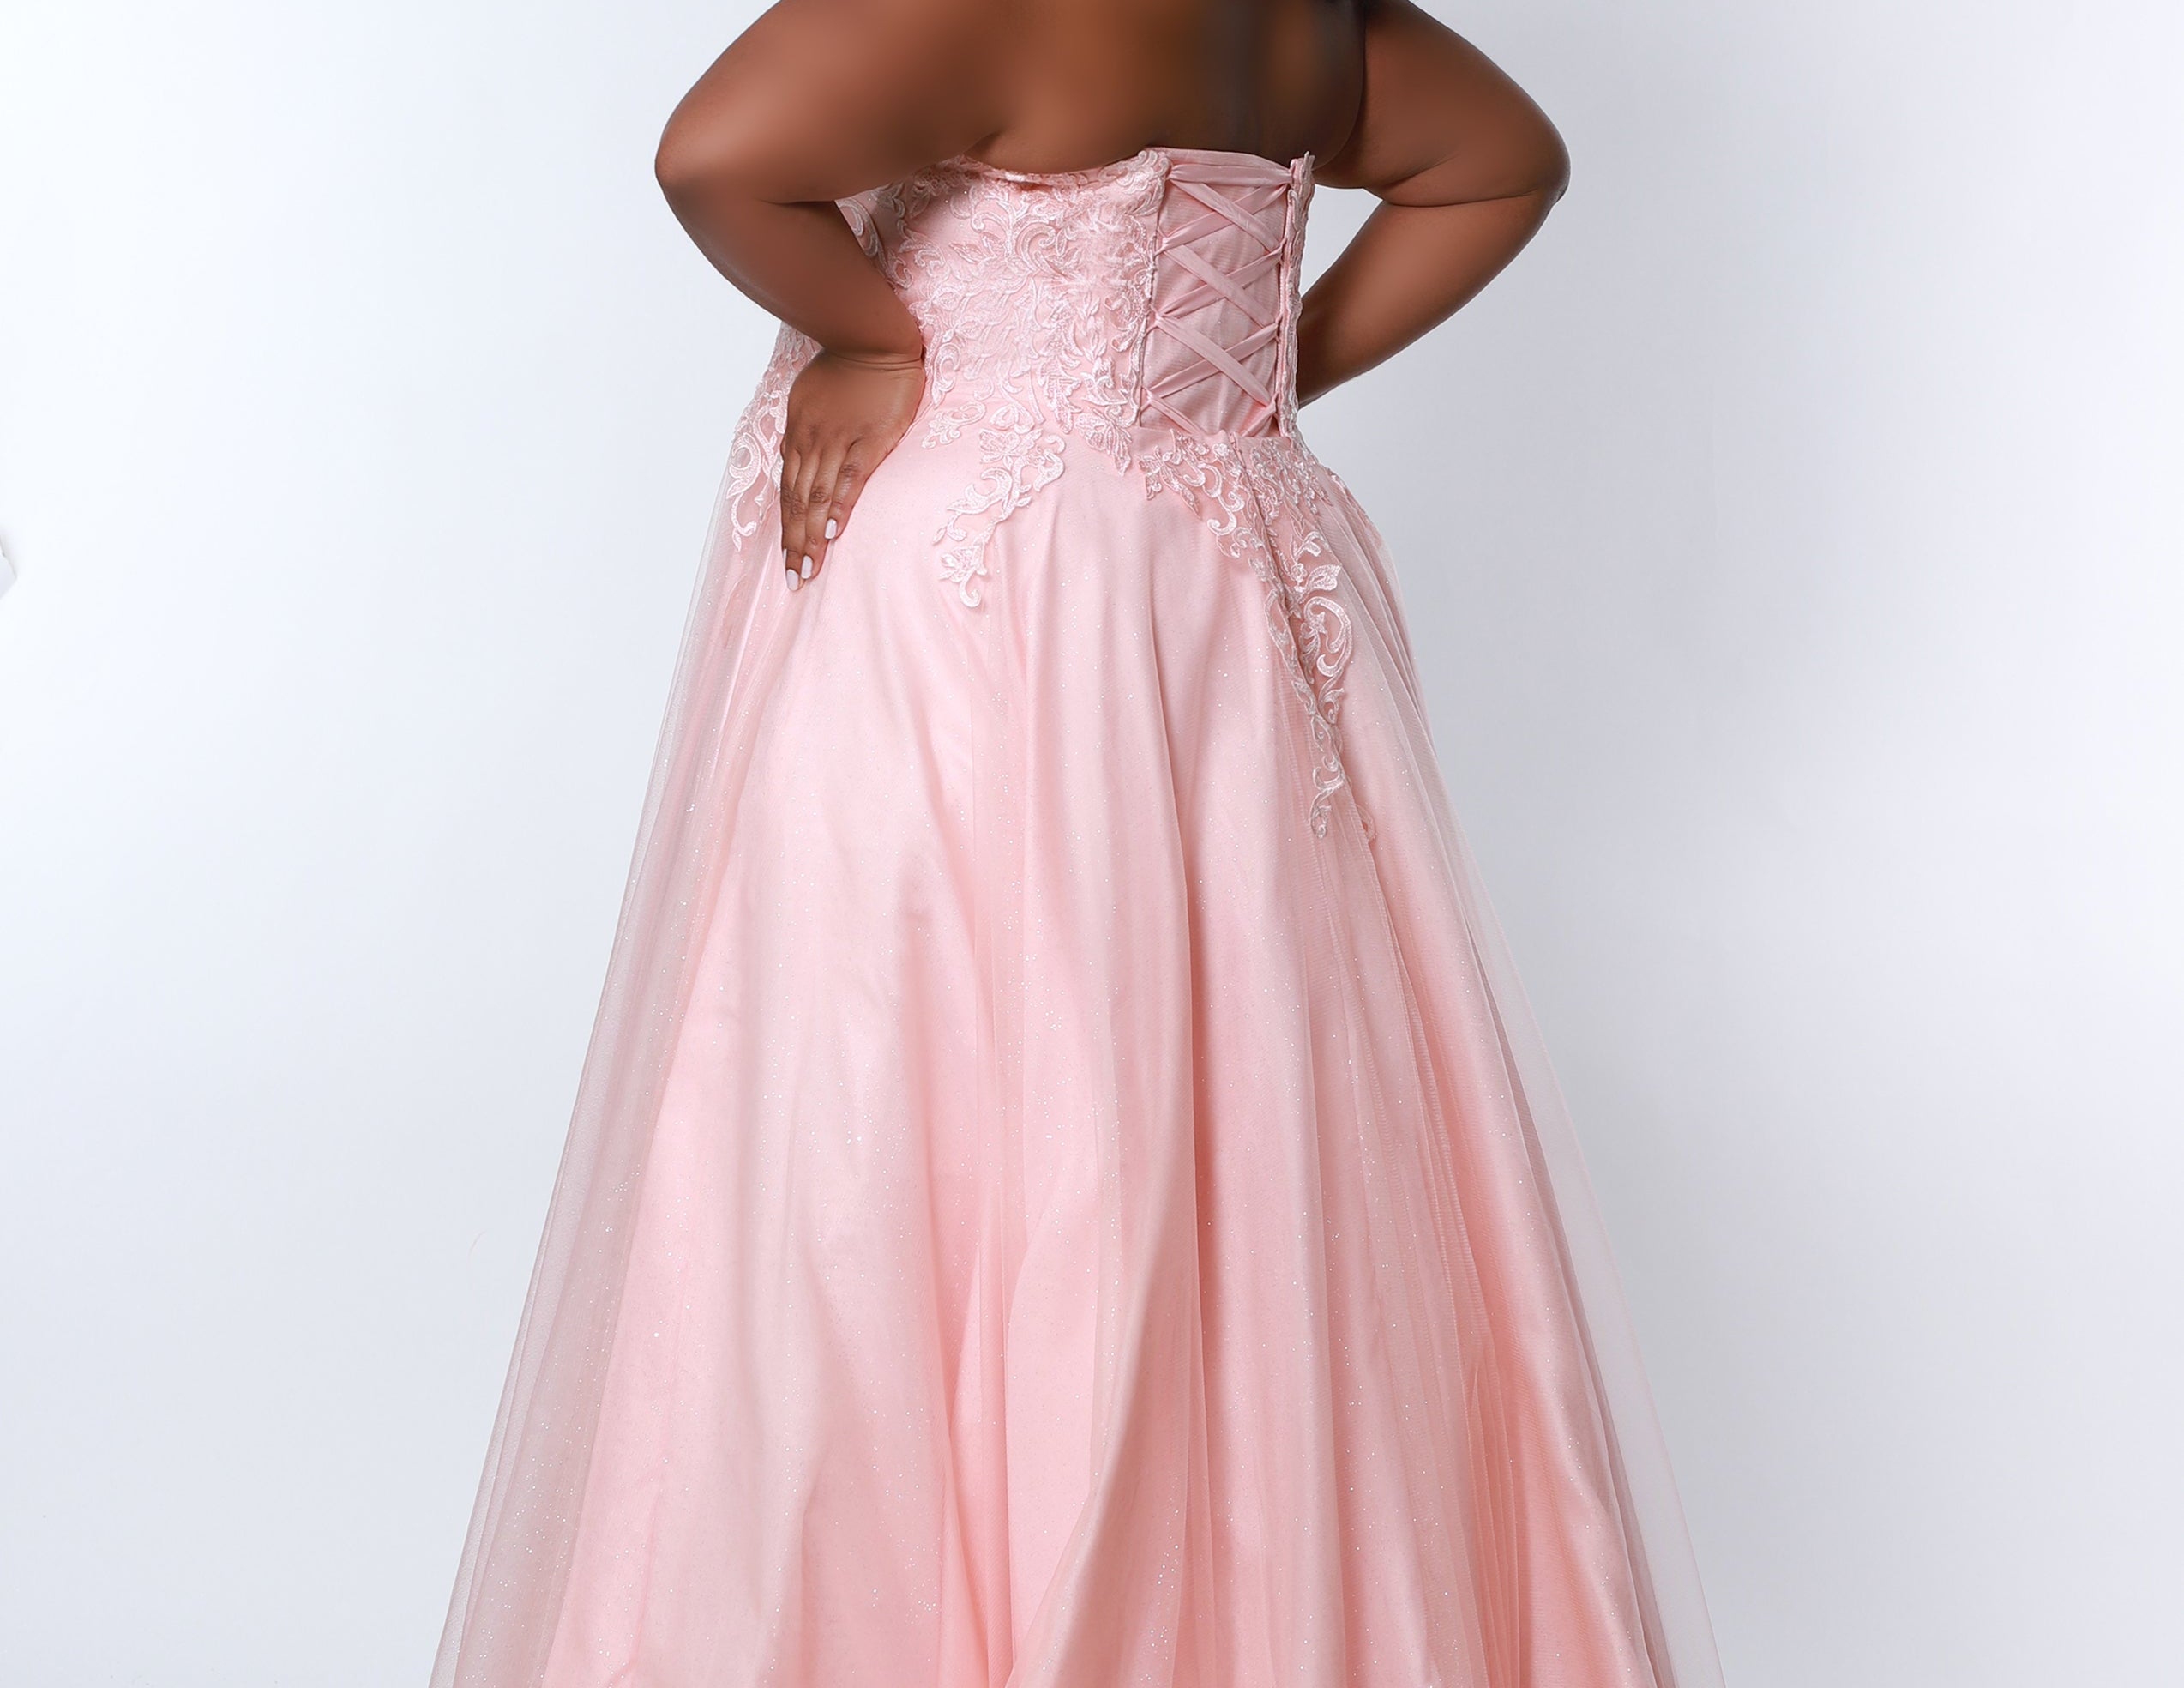 Sydney’s Closet SC7352 in peach pink . Full A-line silhouette with a halter neckline, a natural waistline, and an A-line skirt with crinoline, tulle and glitter tulle. Lace appliques cover the partially lined bodice and top of the skirt. Has a lace up back and modesty panel. Offered in  Ivory, Mint, Mocha, Orchid, and Peach.